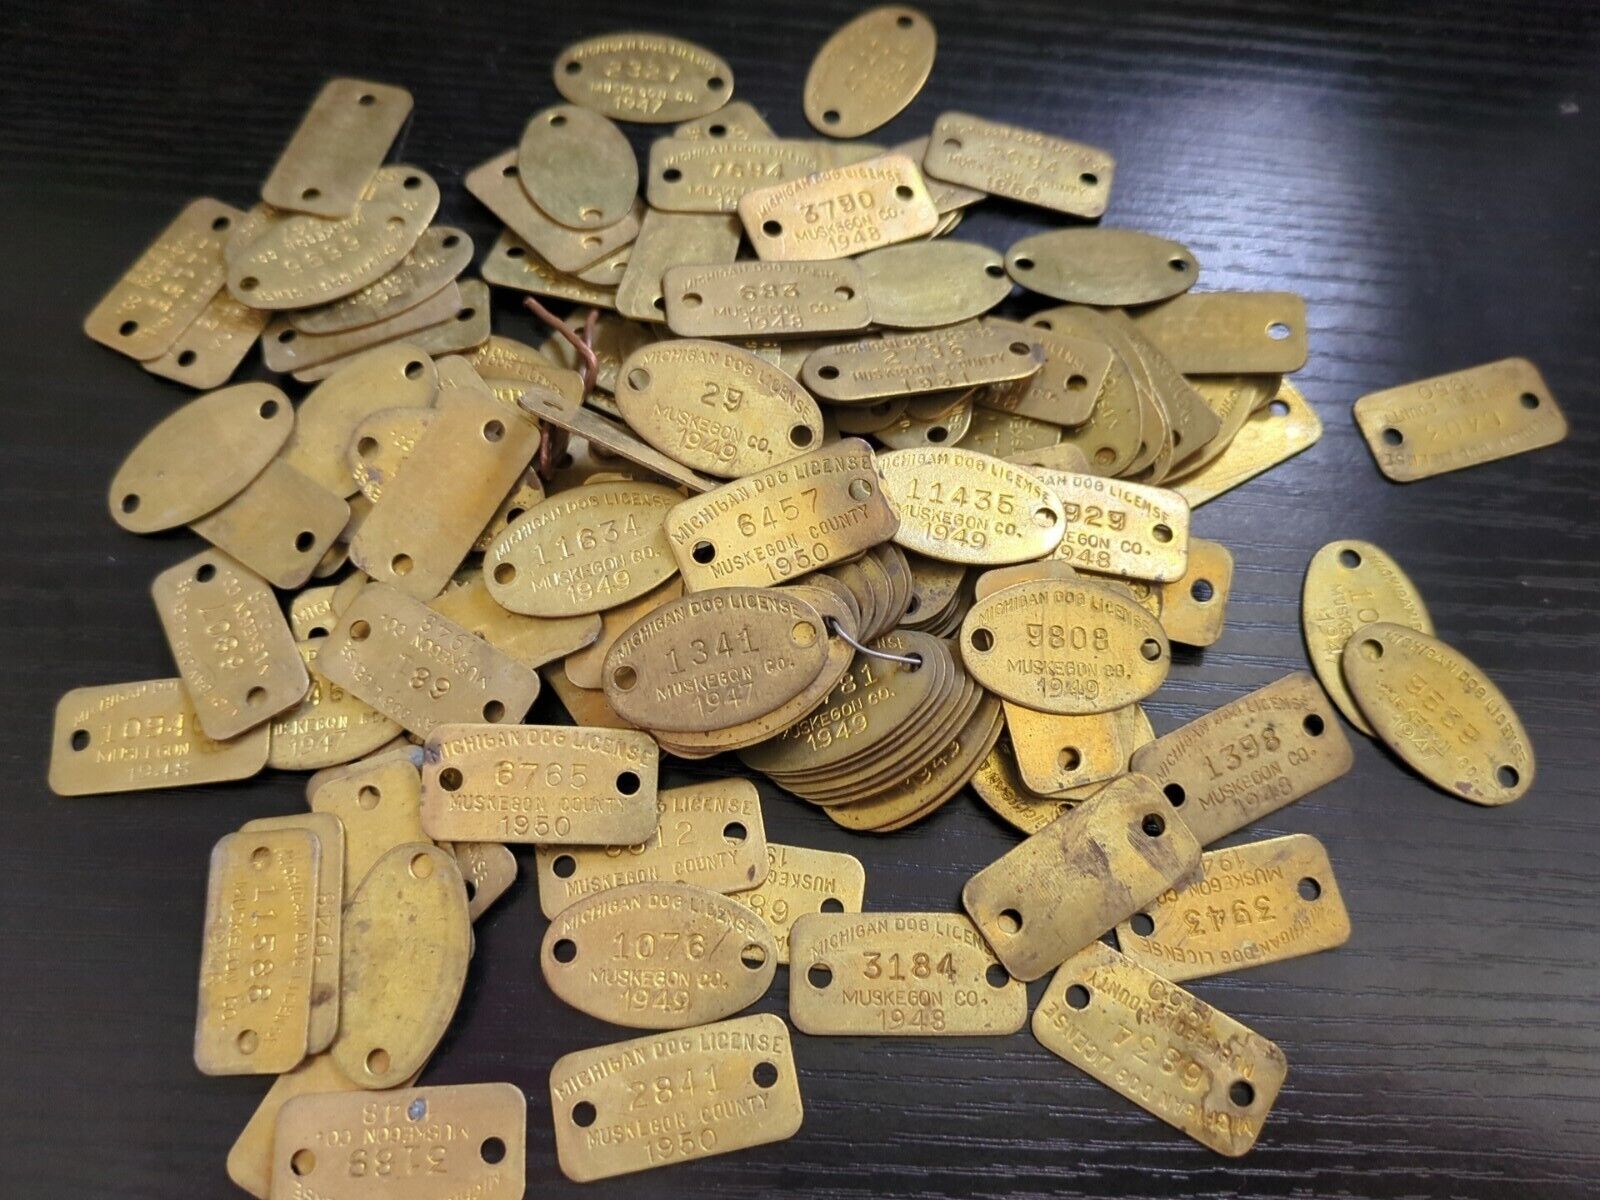 1948 To 51 Vintage Michigan Dog License Tags Lot Of 10 Brass Muskegon Twp Tags 